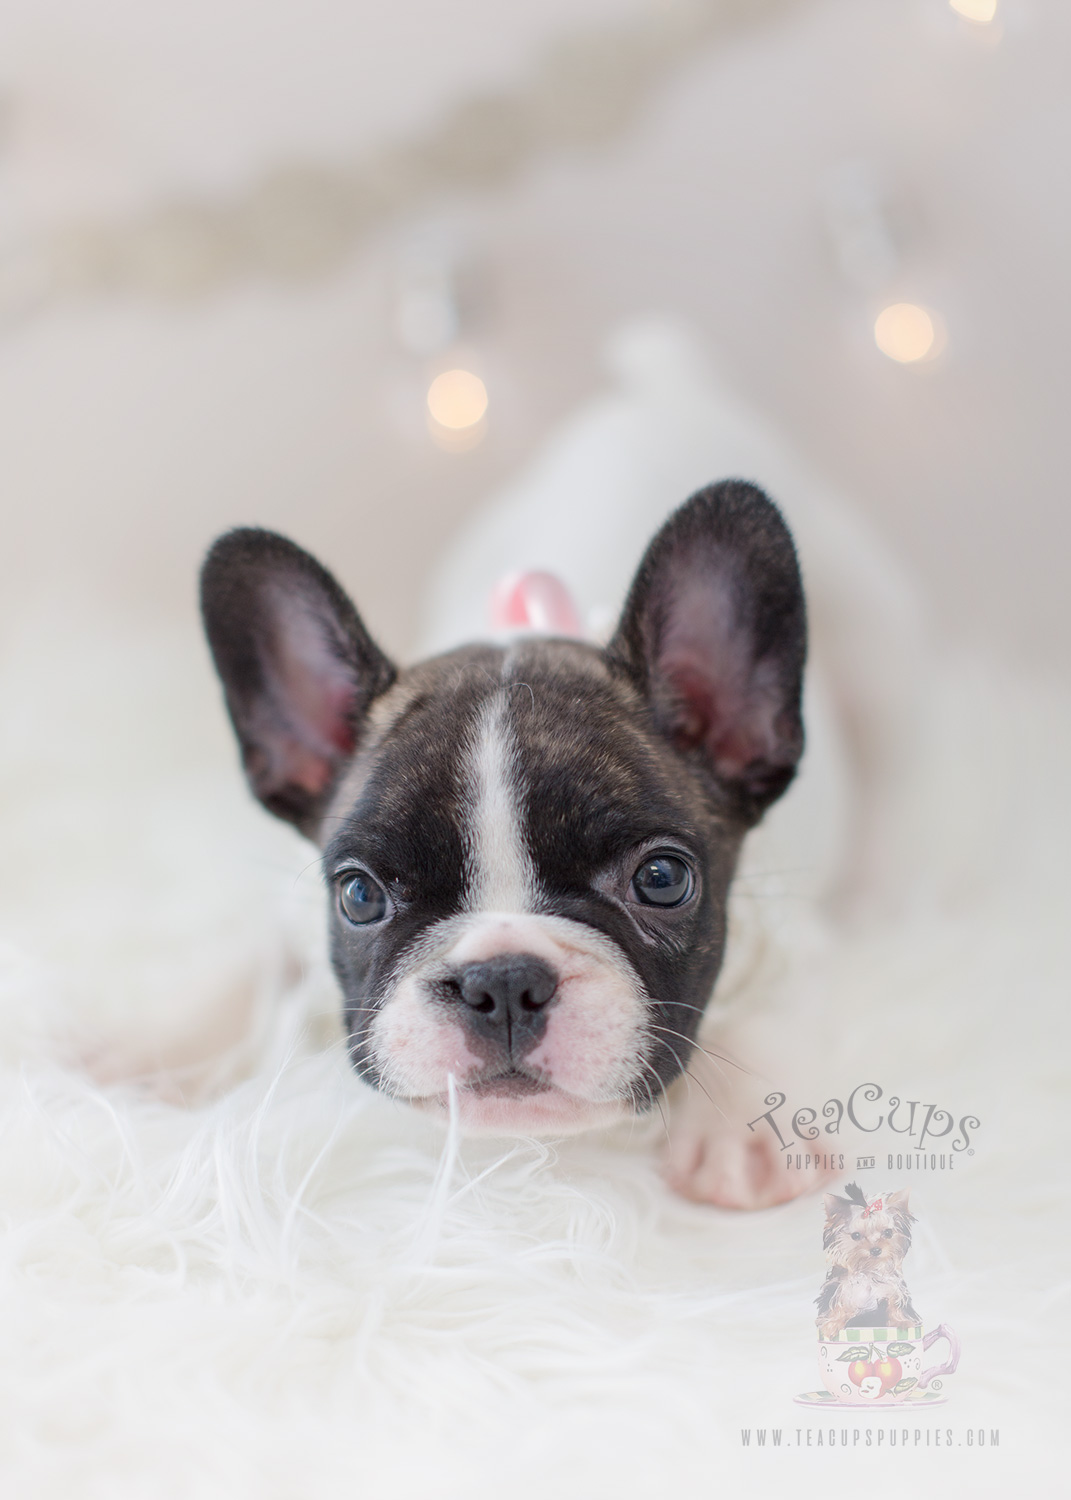 The French Bulldog of your dreams is here! | Teacups, Puppies & Boutique